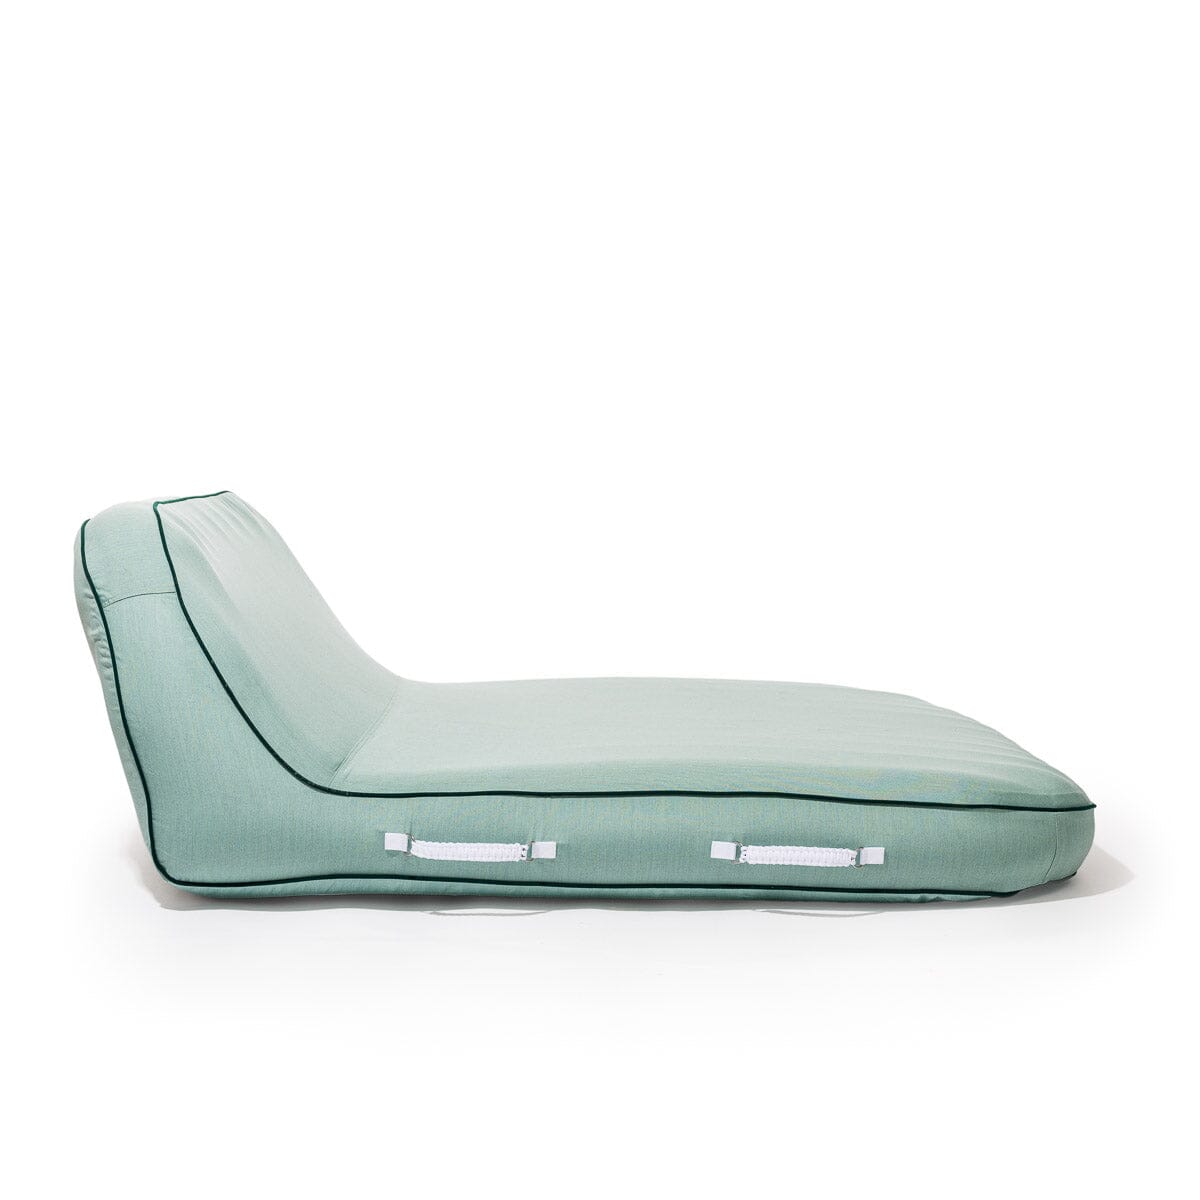 The XL Pool Lounger - Rivie Green Pool Lounger Business & Pleasure Co 